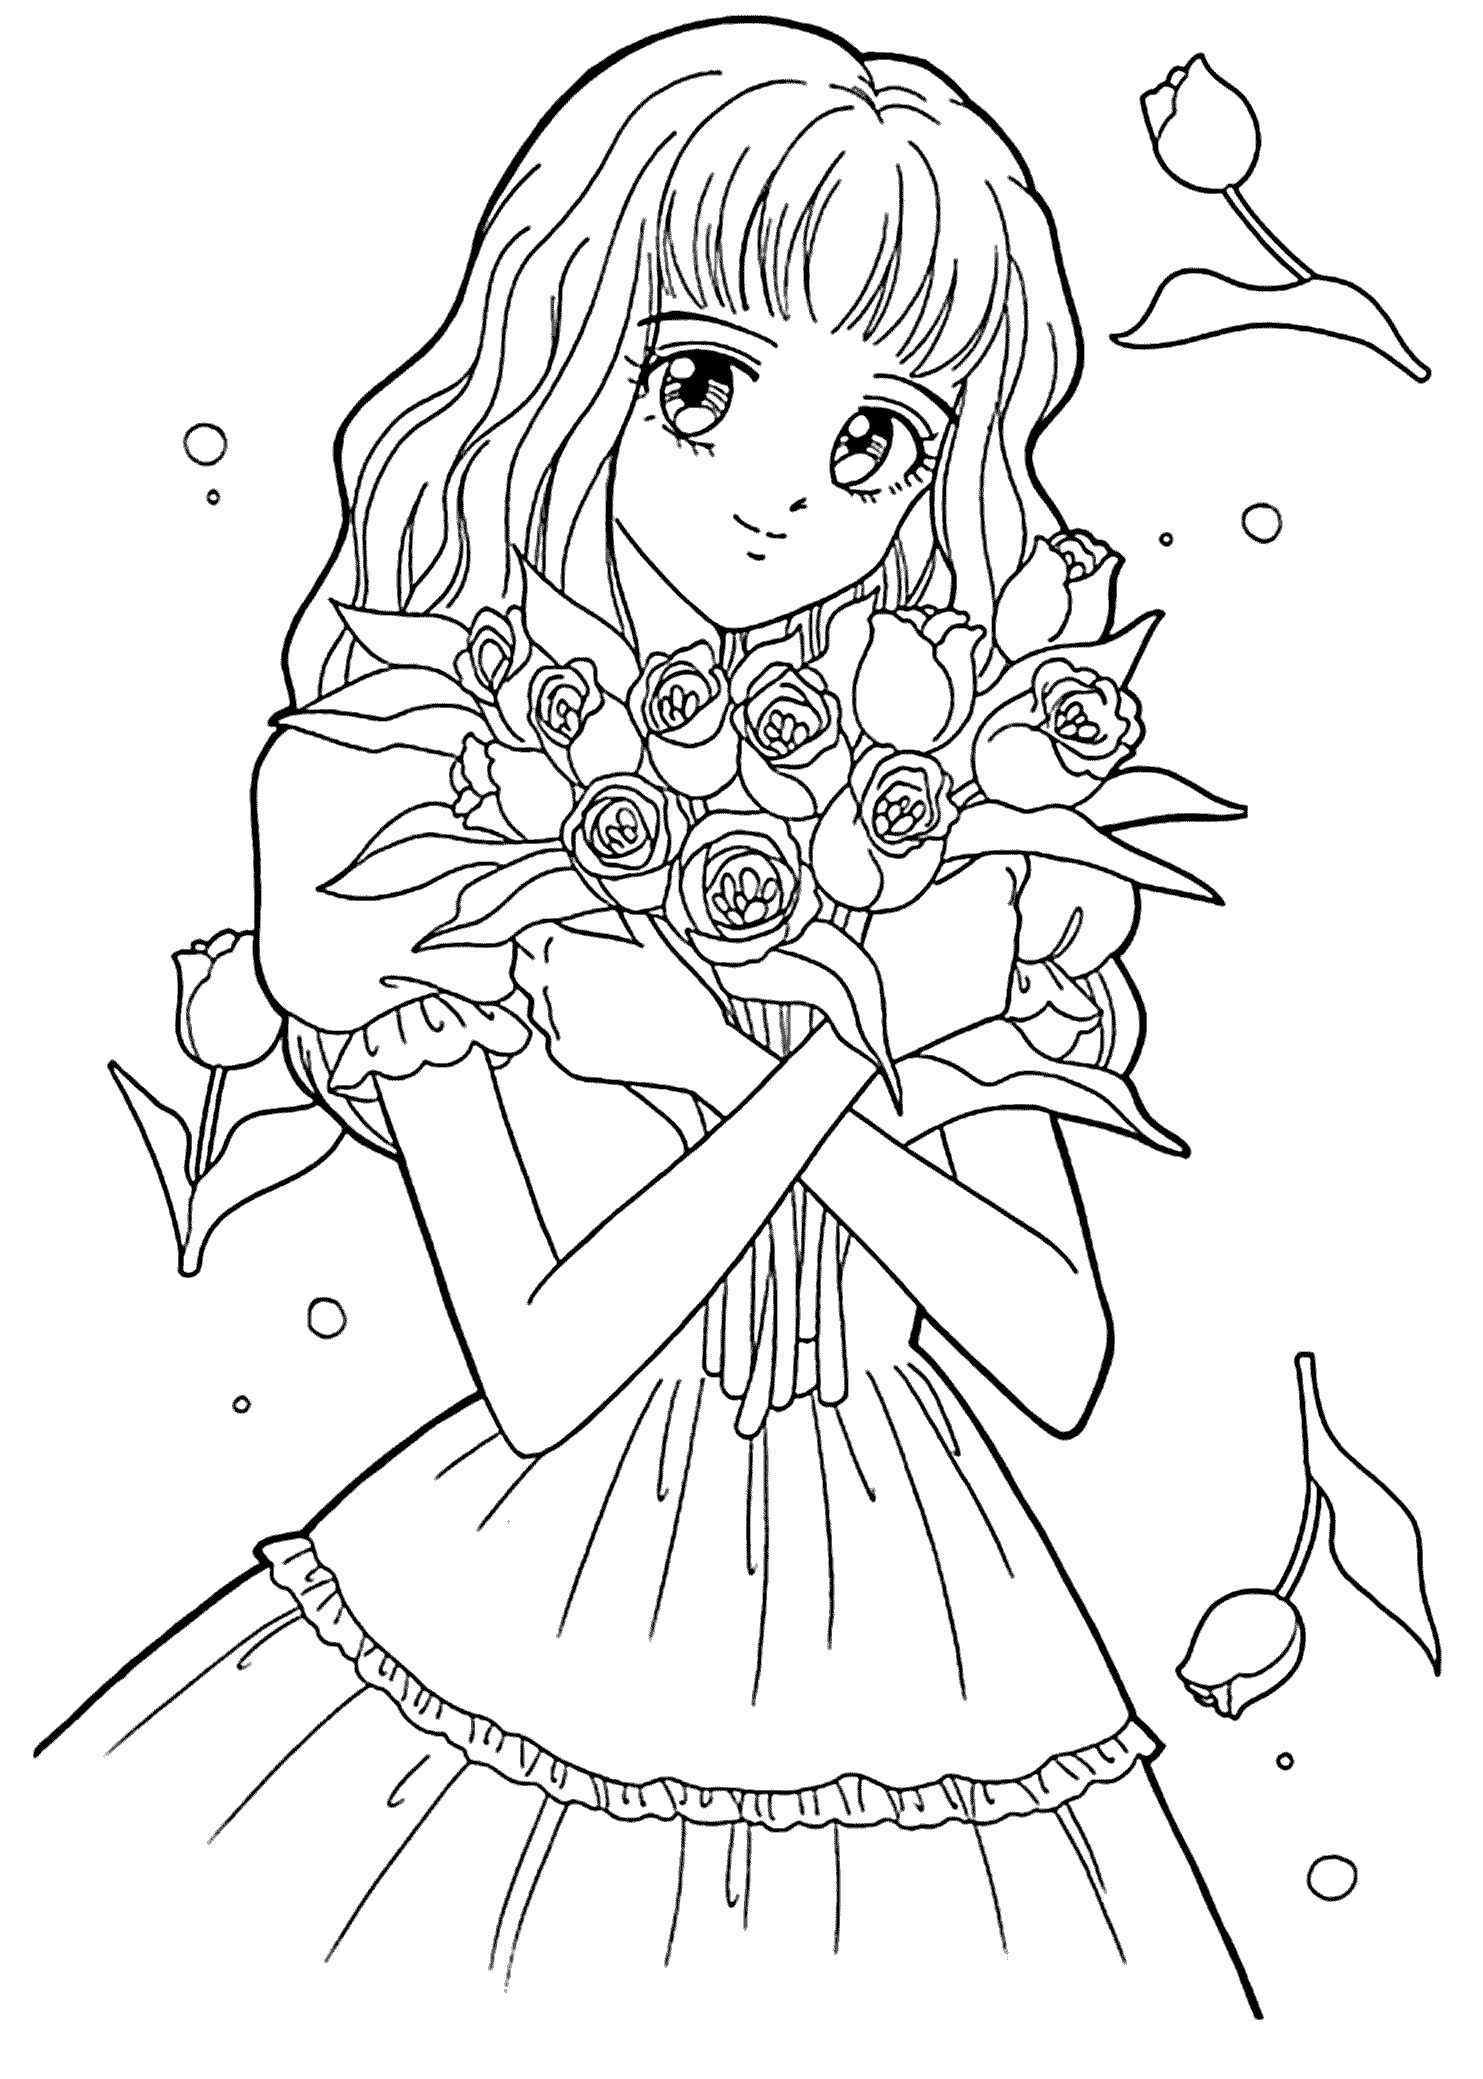 Printable Coloring Pages For Teen Girls
 Best Free Printable Coloring Pages for Kids and Teens